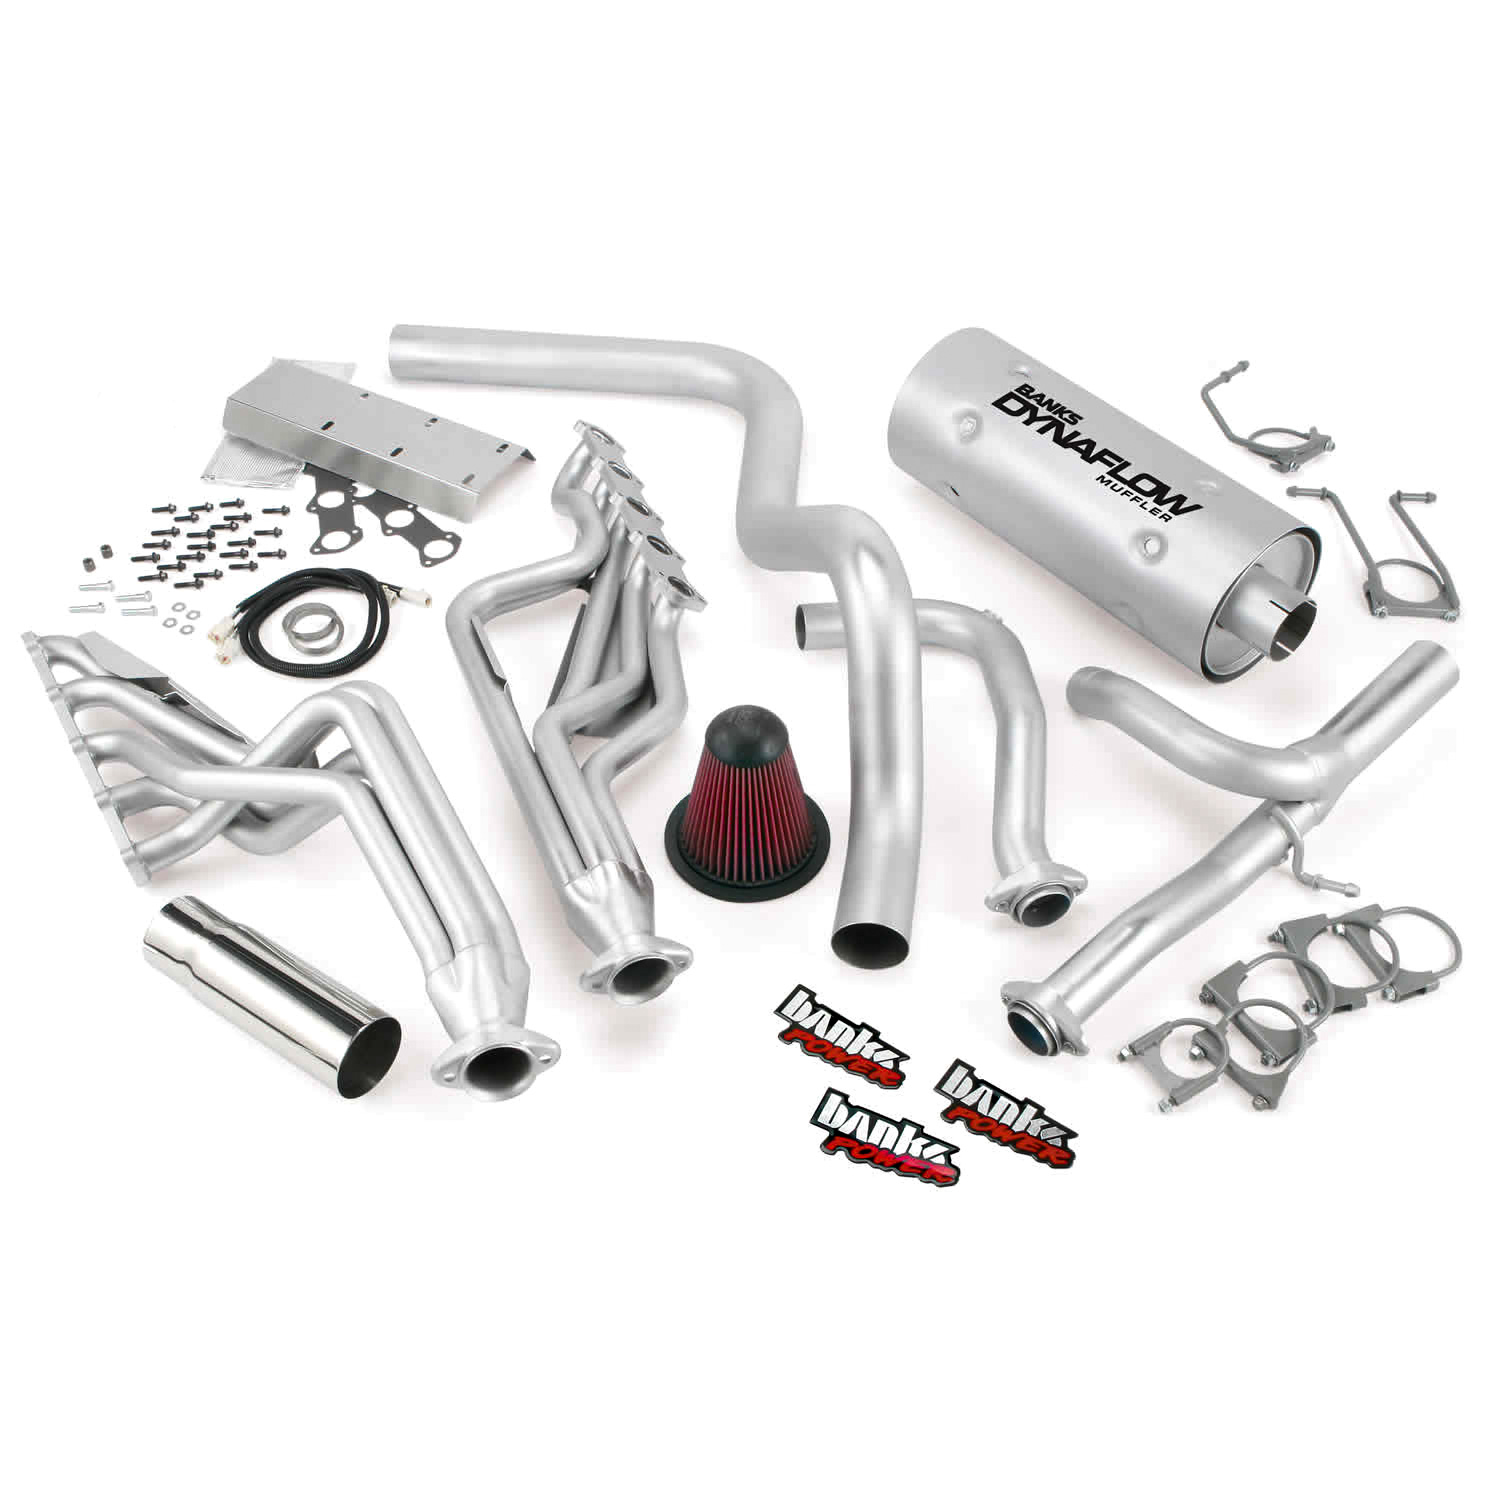 Exhaust PowerPack System 1997-04 Ford Class C Motorhome